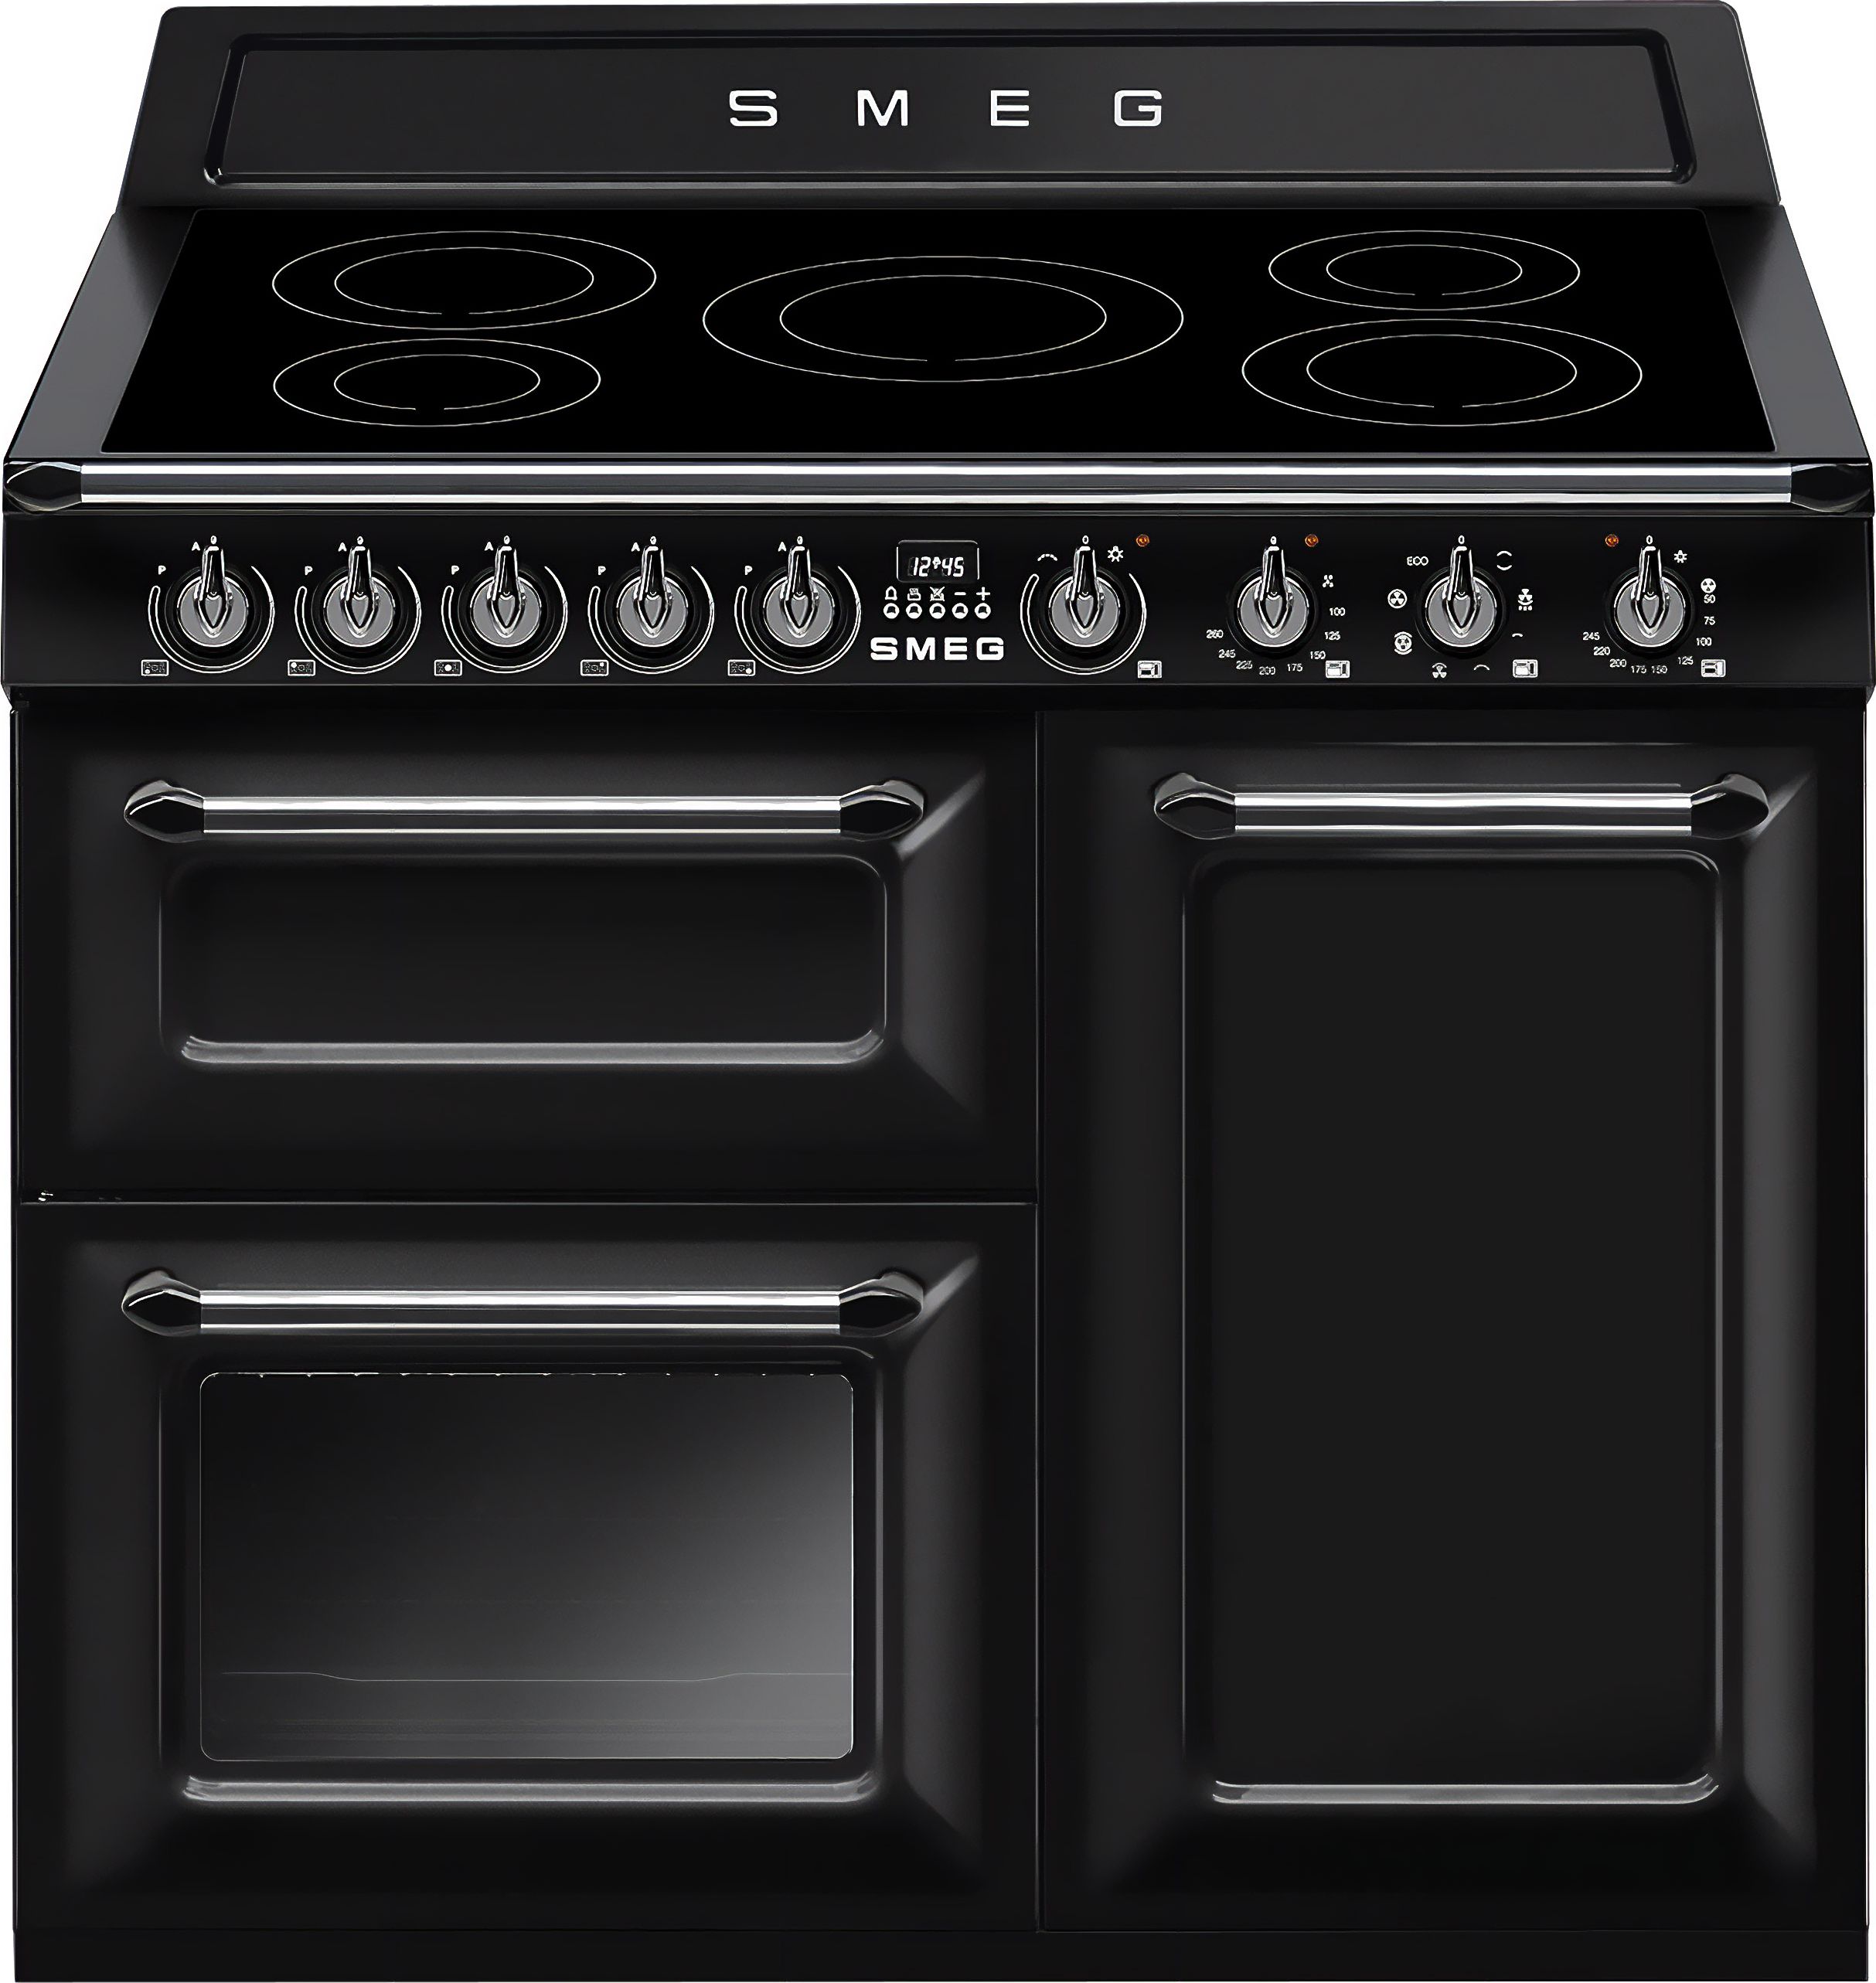 Smeg Victoria TR103IBL2 100cm Electric Range Cooker with Induction Hob - Black - A/B Rated, Black